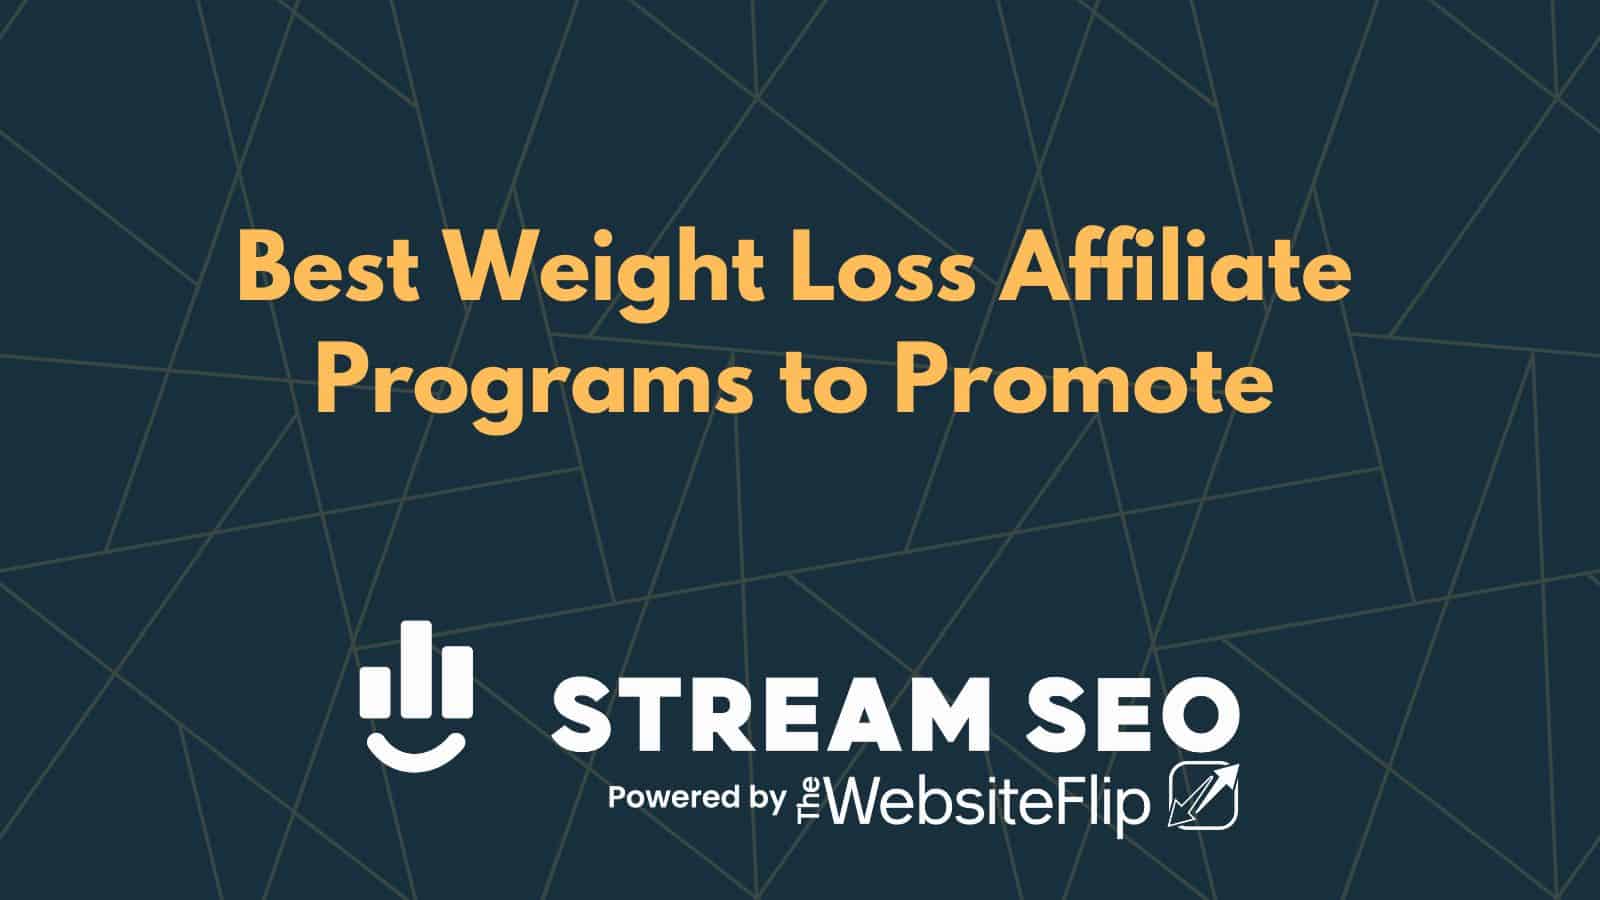 9 Best Weight Loss Affiliate Programs to Promote